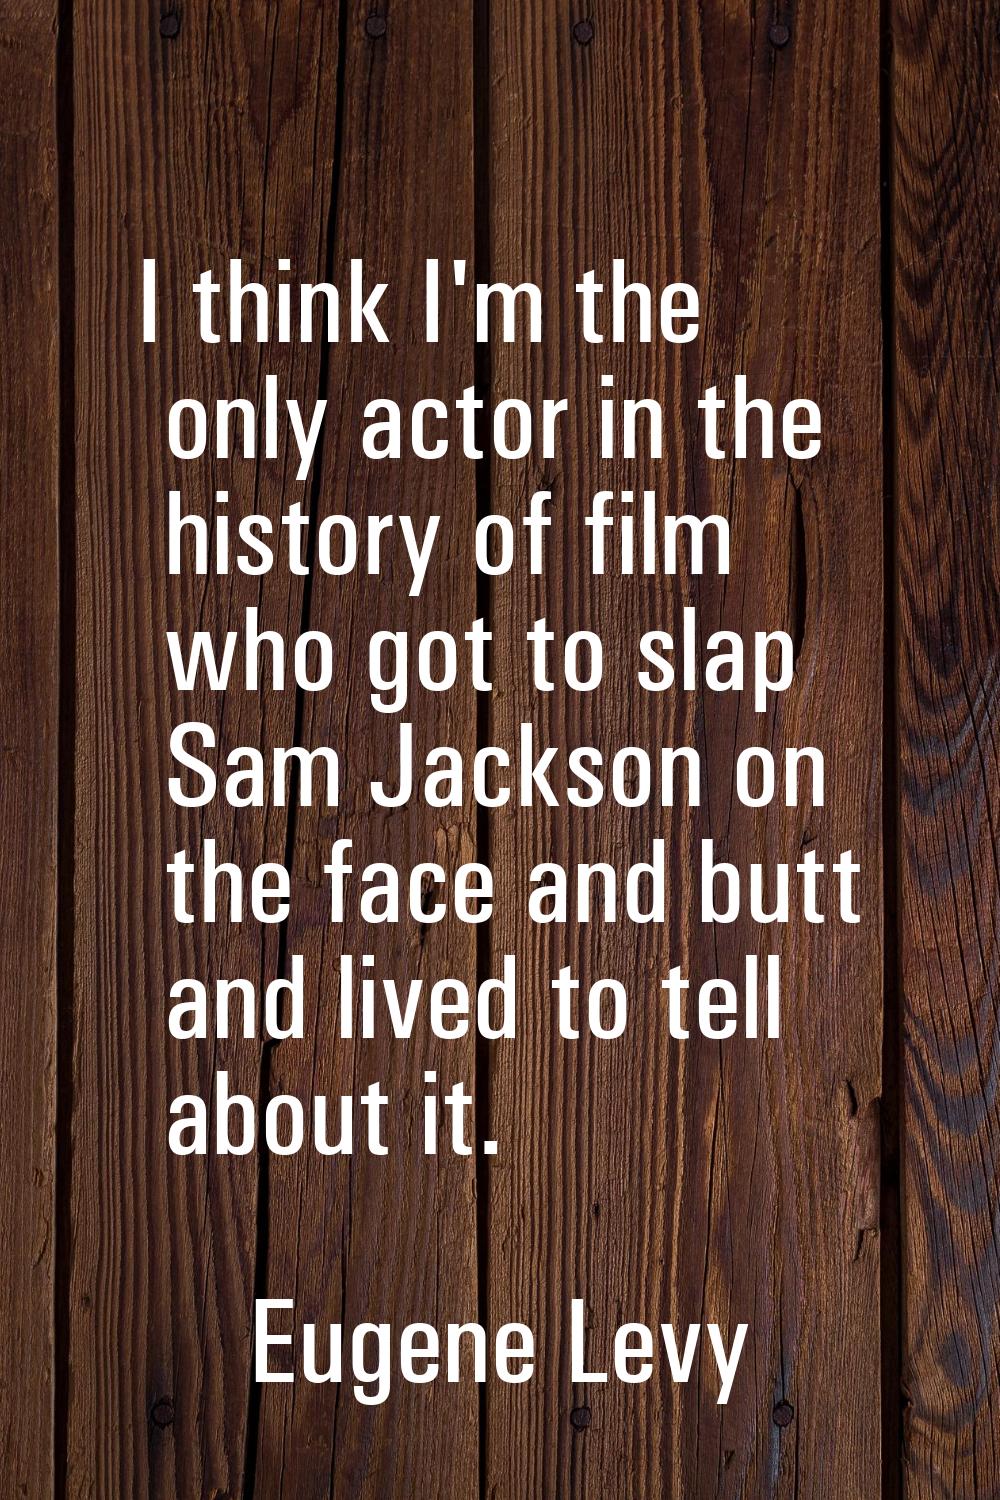 I think I'm the only actor in the history of film who got to slap Sam Jackson on the face and butt 